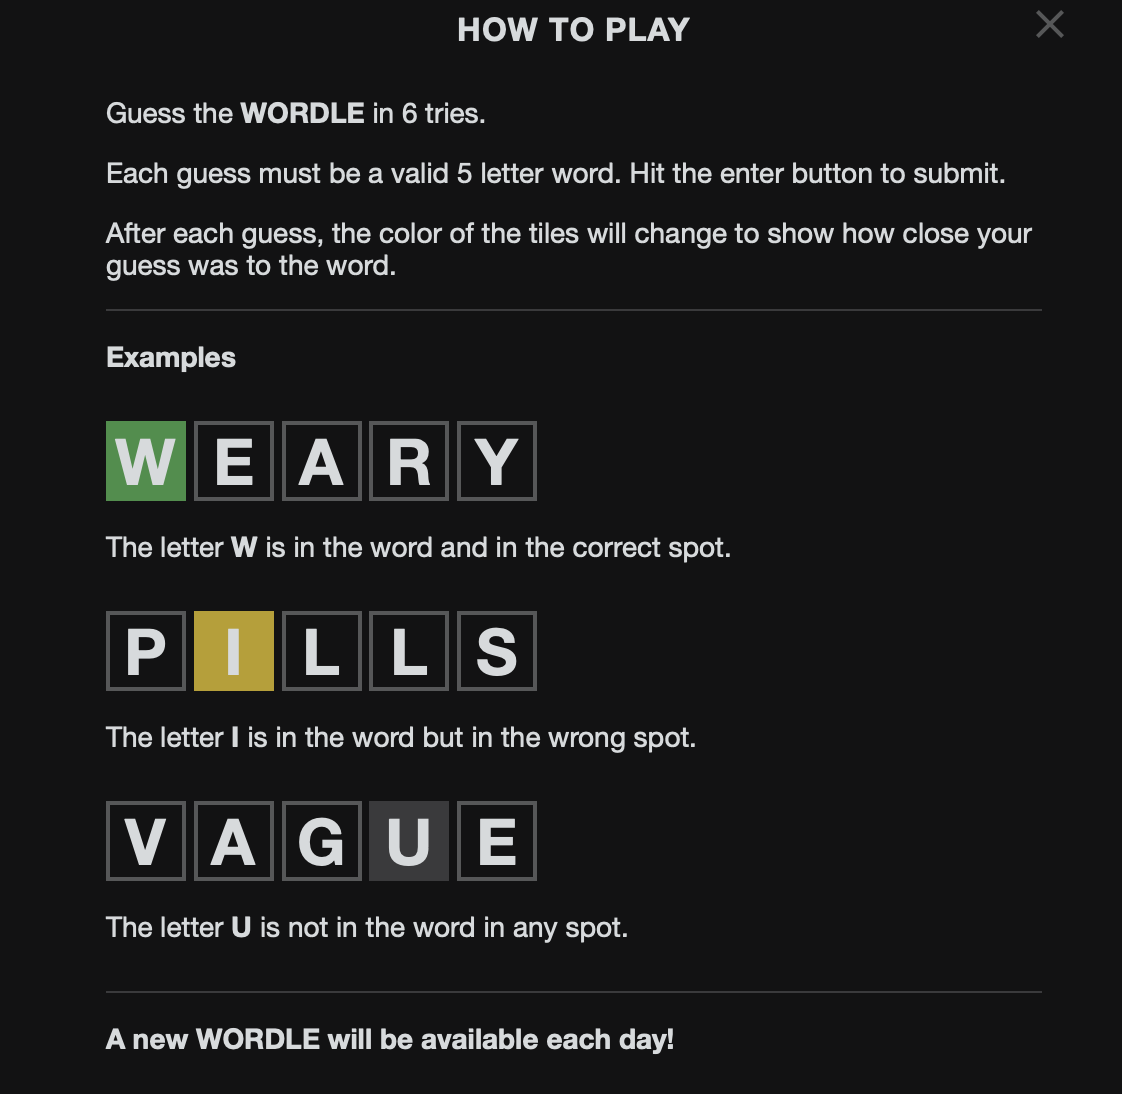 Play WORDLE, a Fun Daily Word Game